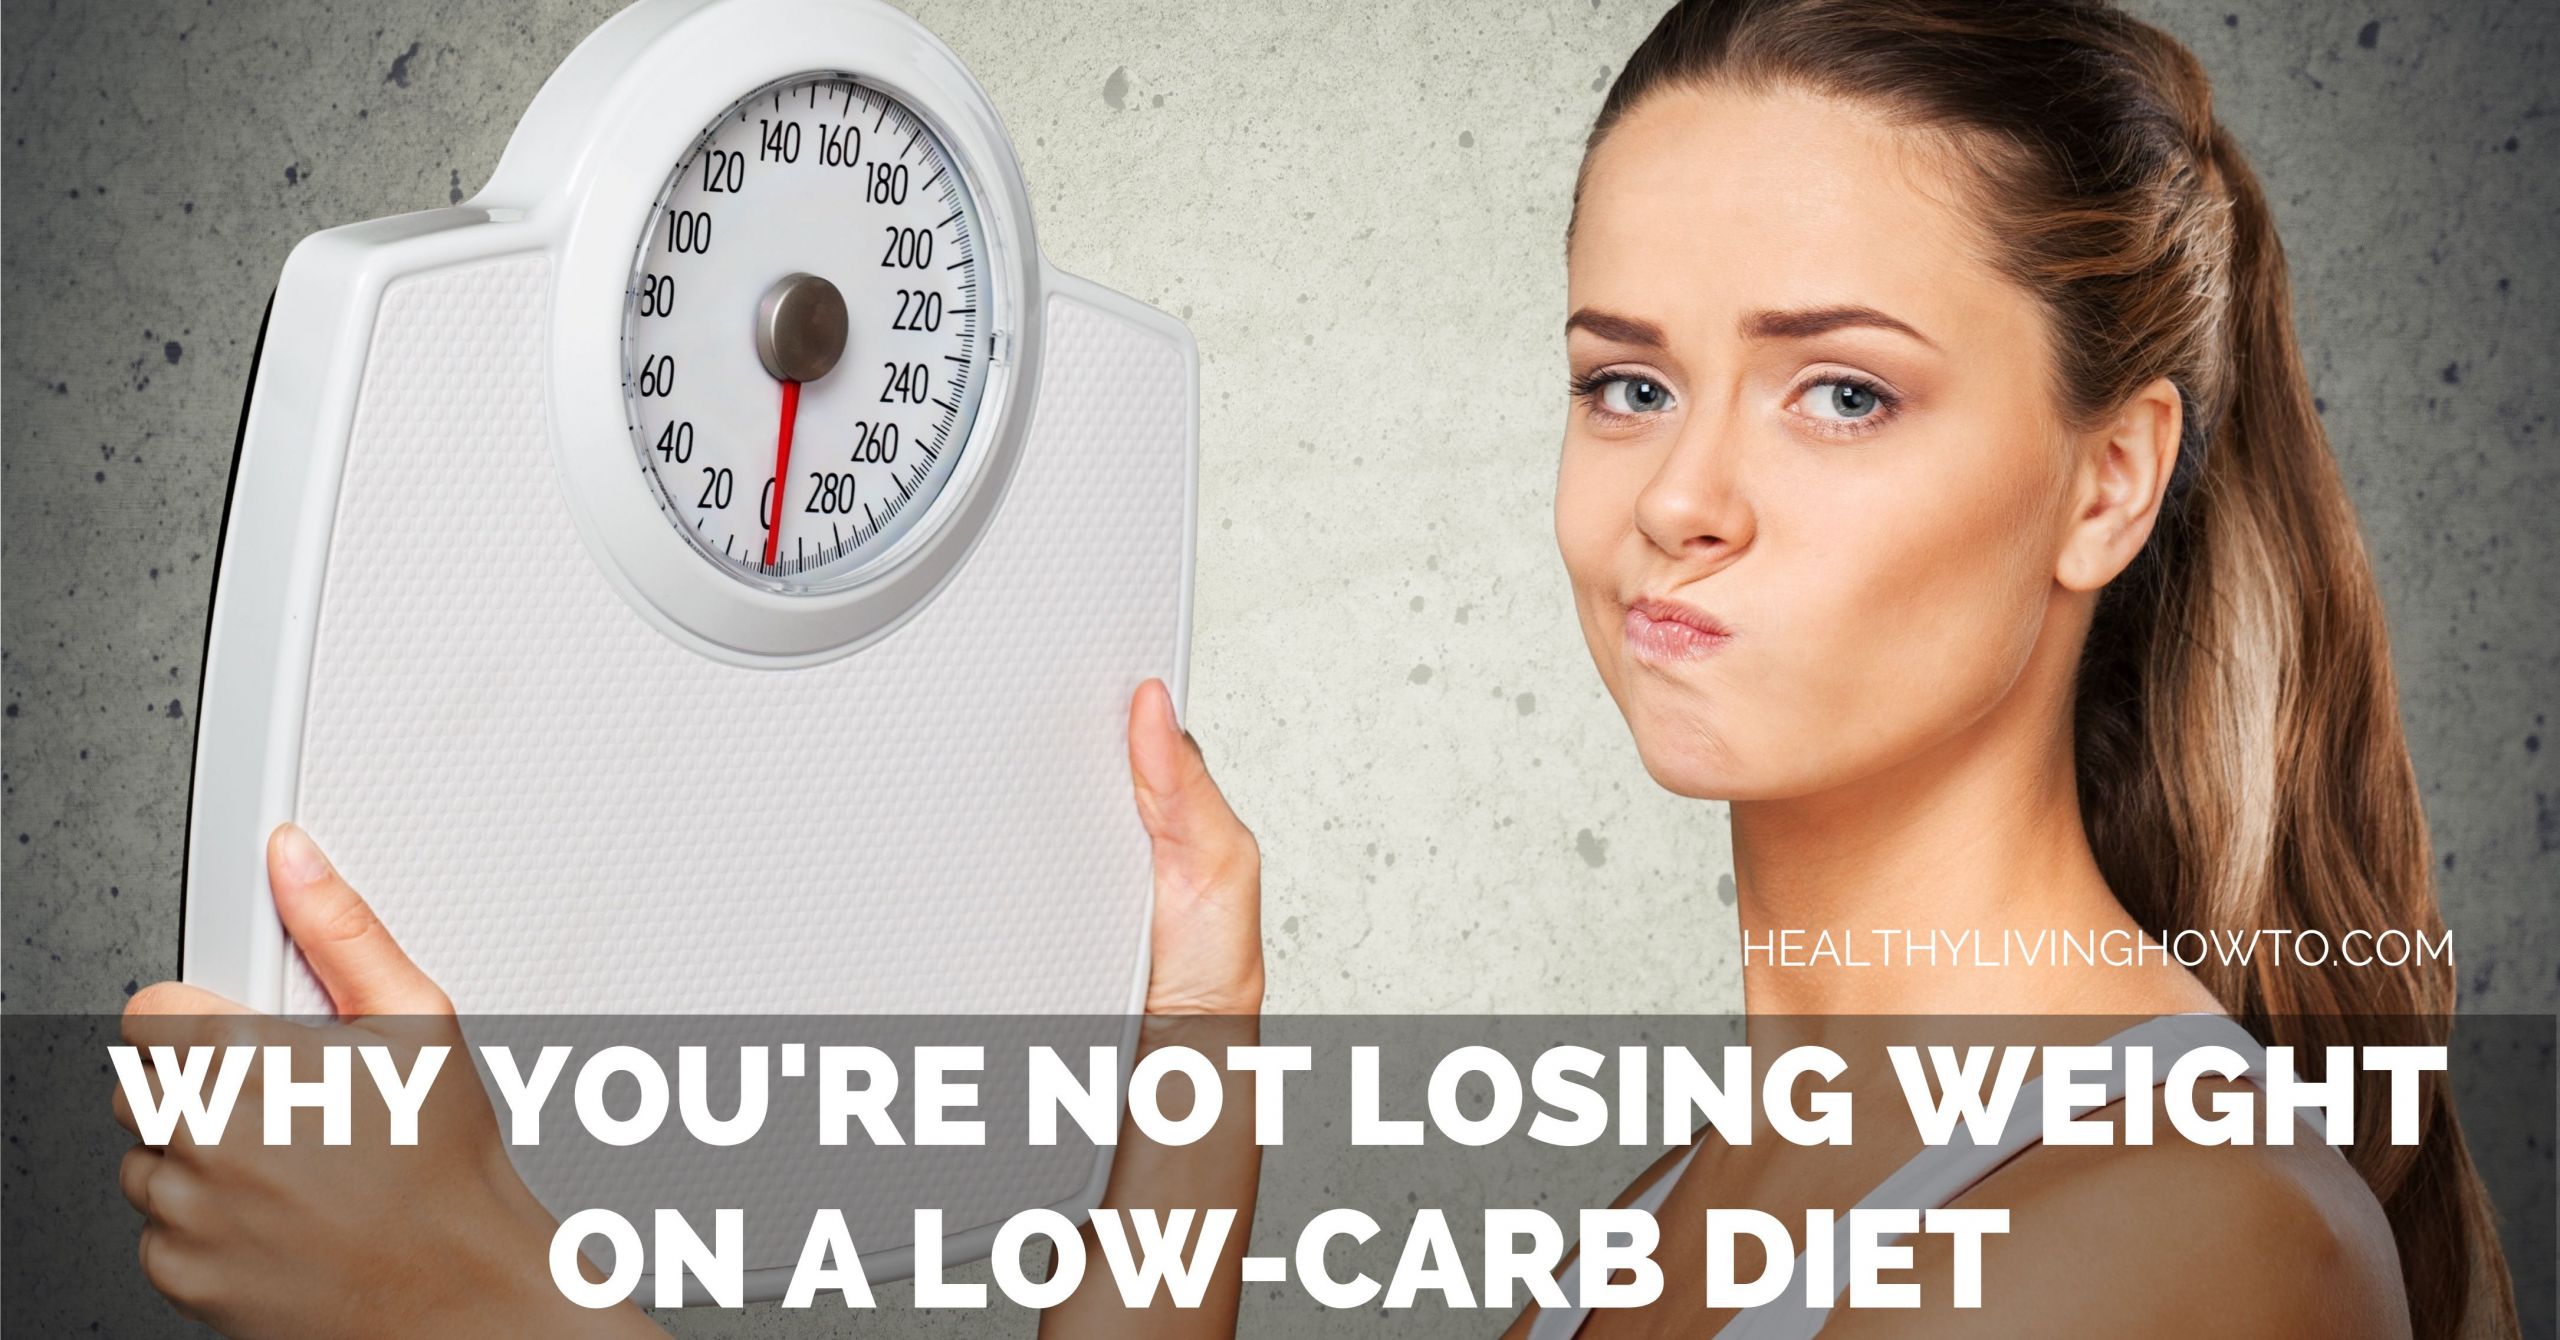 Low Carbohydrate Diet Losing Weight
 Why You’re Not Losing Weight on a Low Carb Diet